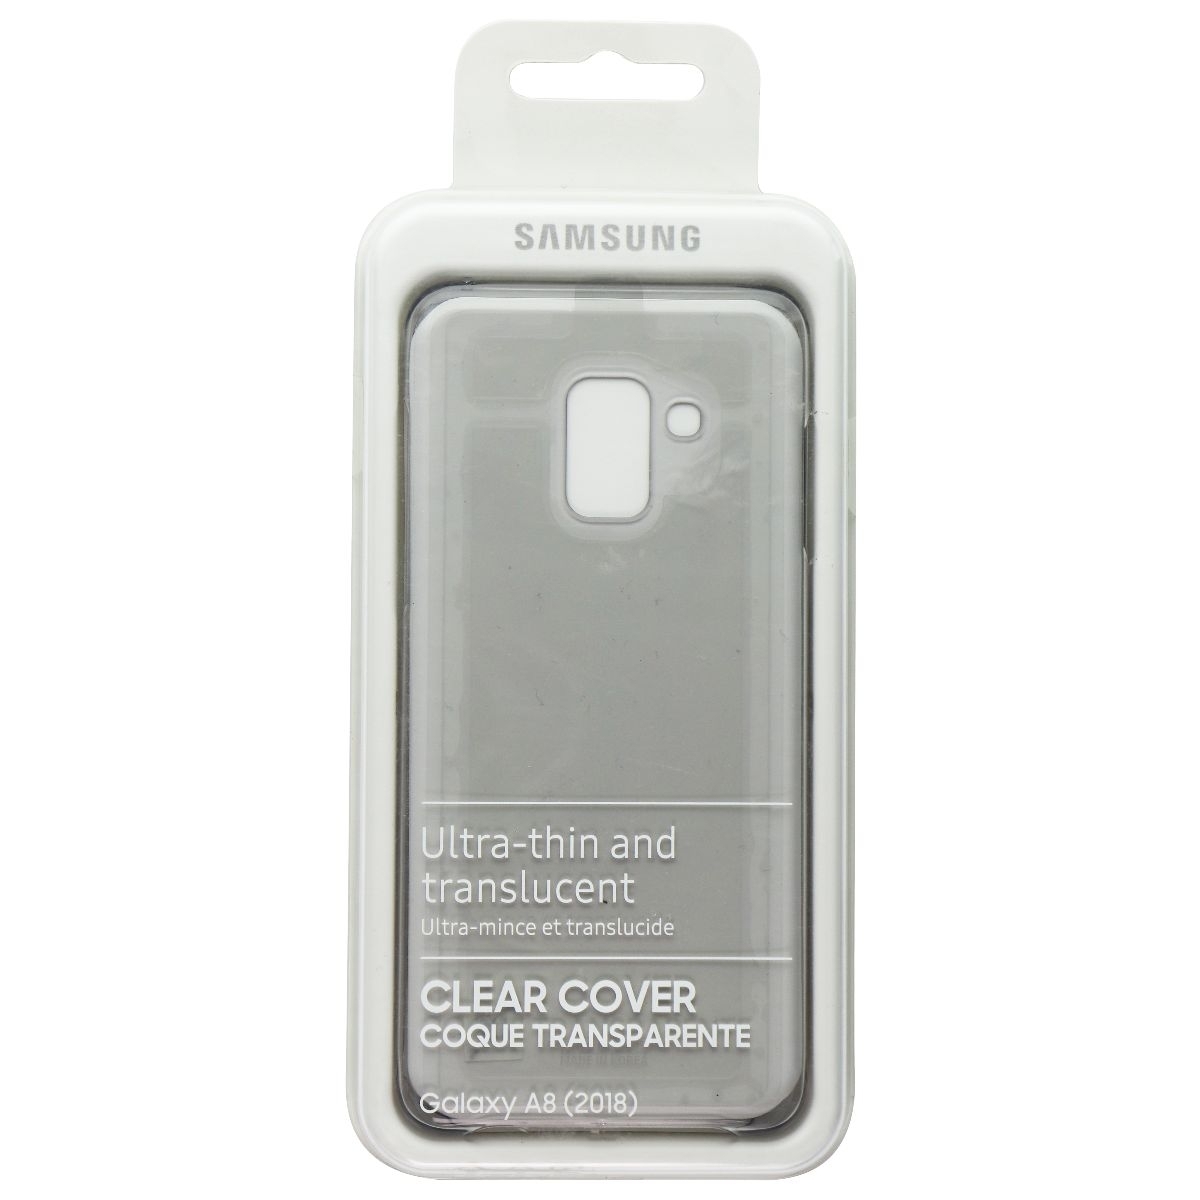 Samsung Official Clear Cover For Samsung Galaxy A8 (2018) - Clear (Refurbished)